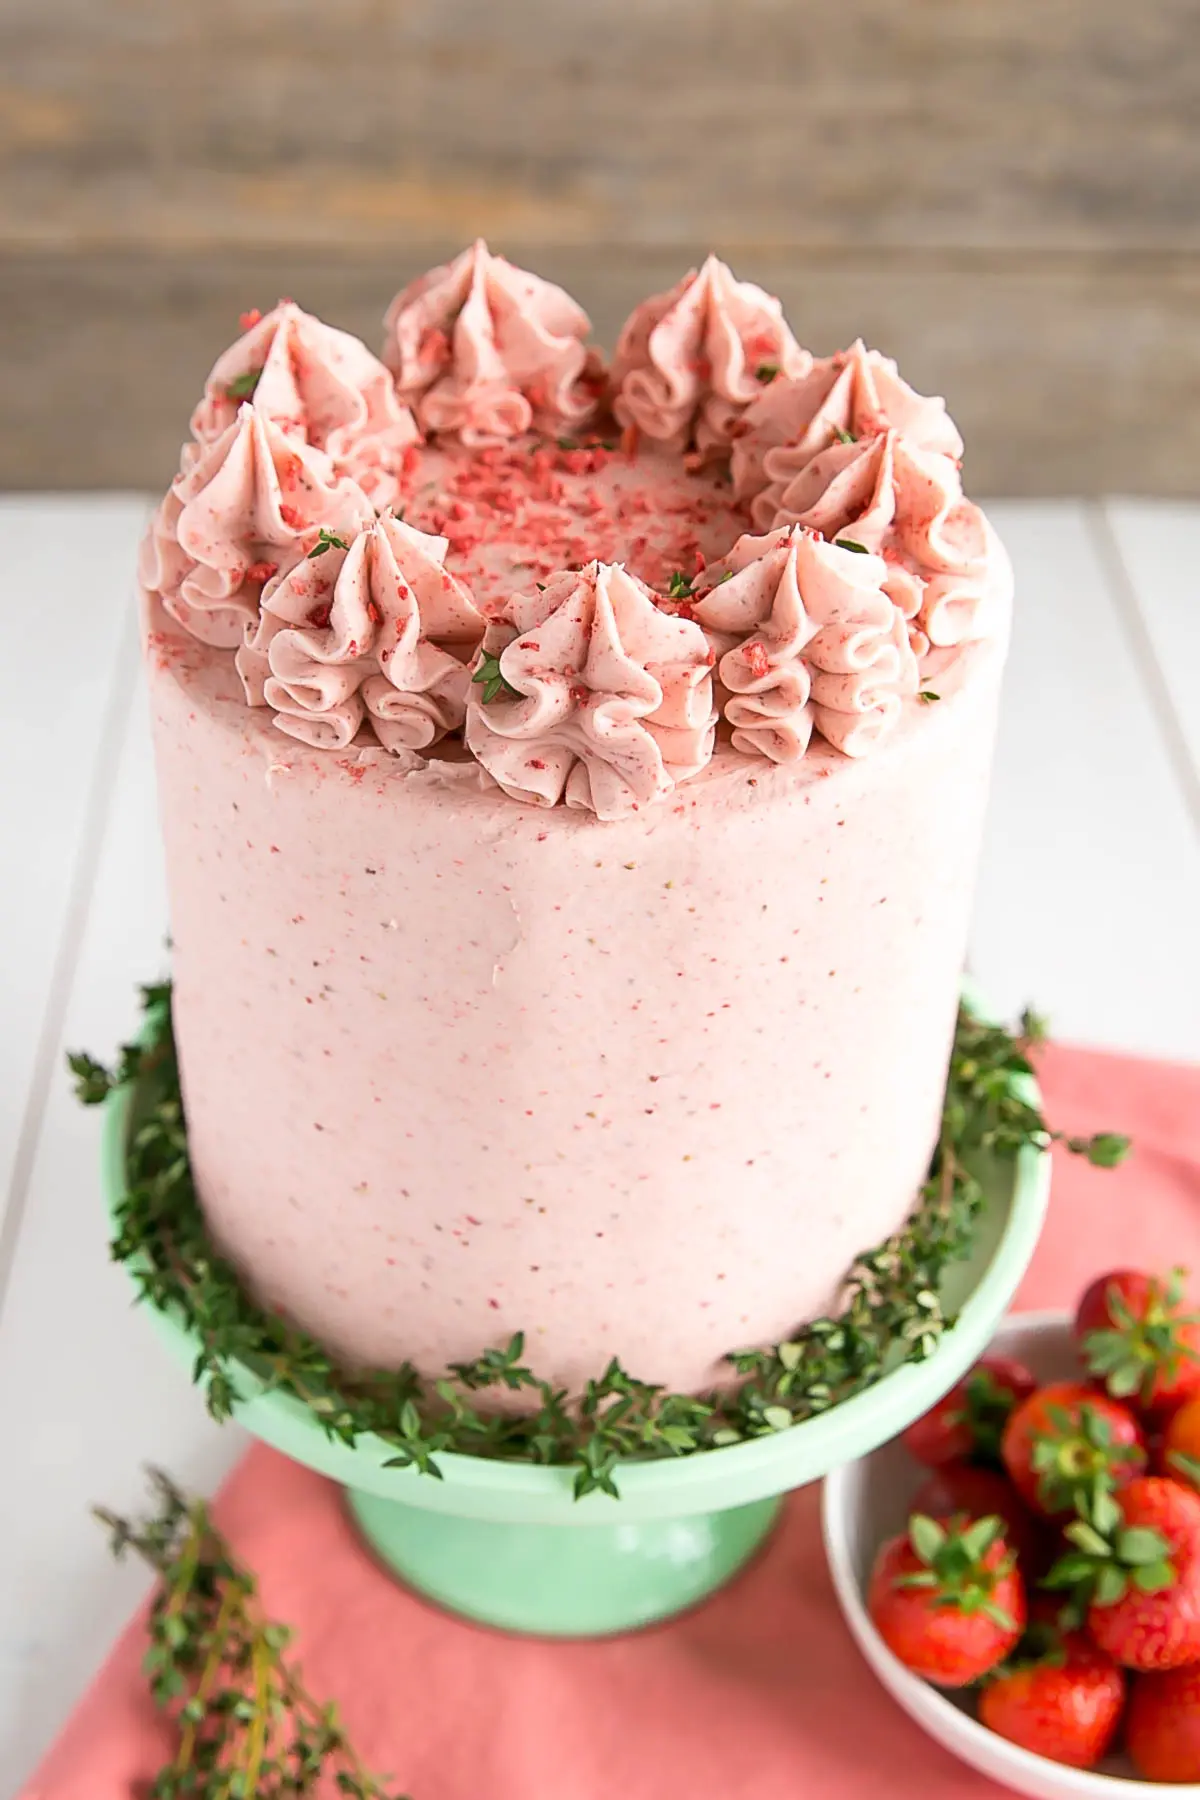 Strawberry Cake With Mascarpone Buttercream Liv For Cake,How Long To Bake Bacon